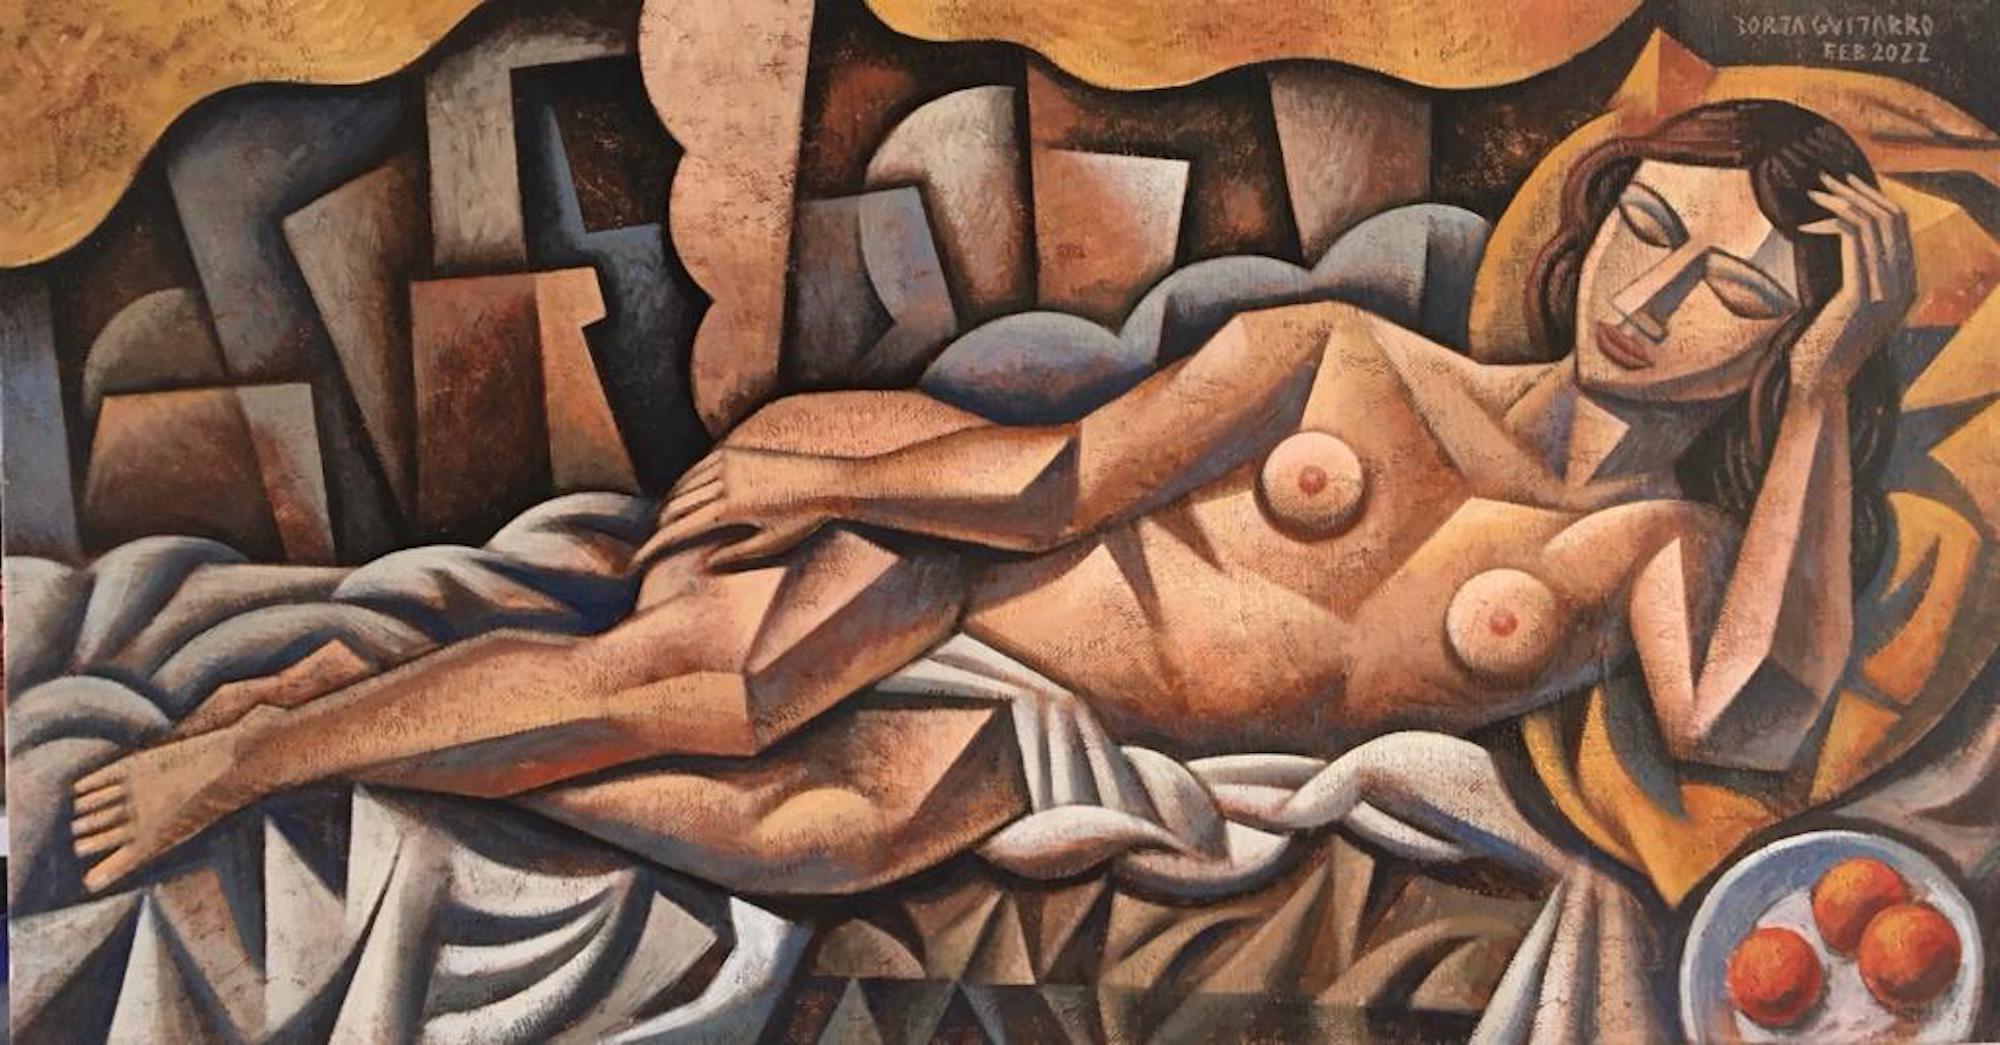 Reclining Nude - cubism art abstract figurative spanish portrature female form